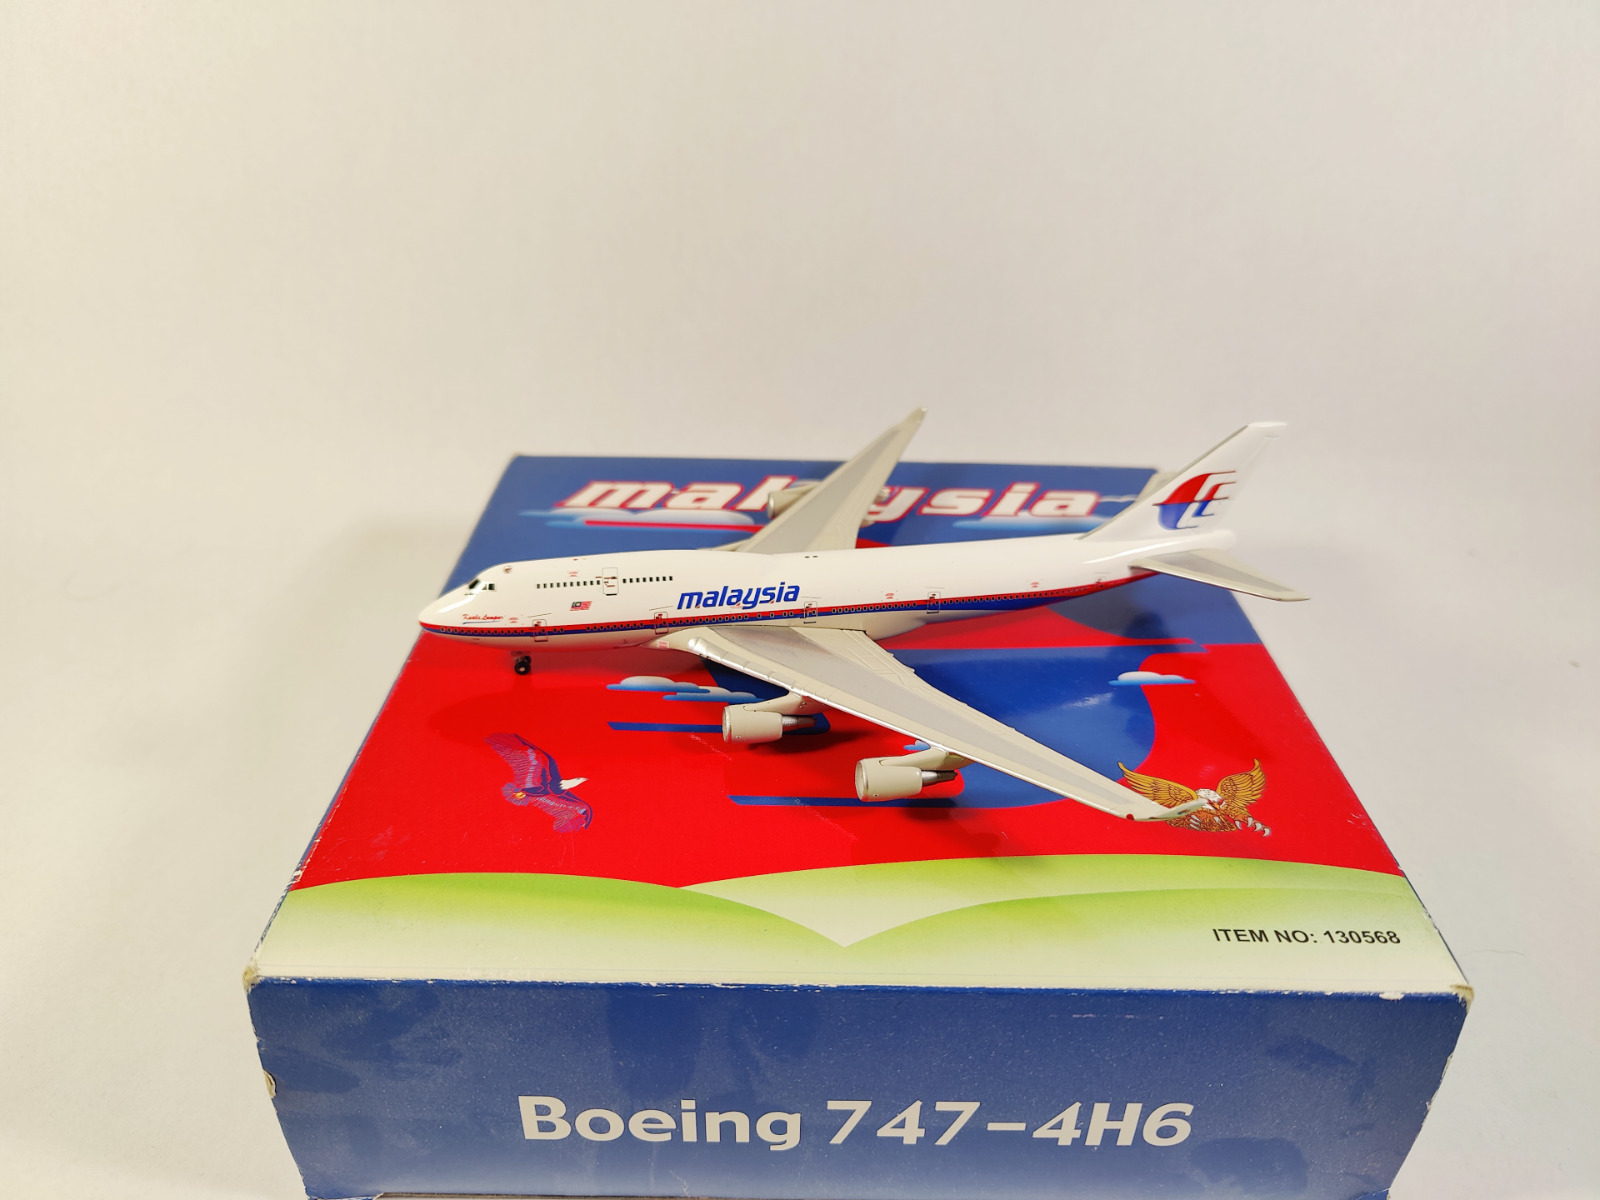 MALAYSIA AIRLINES Boeing 747-400 Aircraft Model 1:400 Scale Tucano Line 9M-MHL